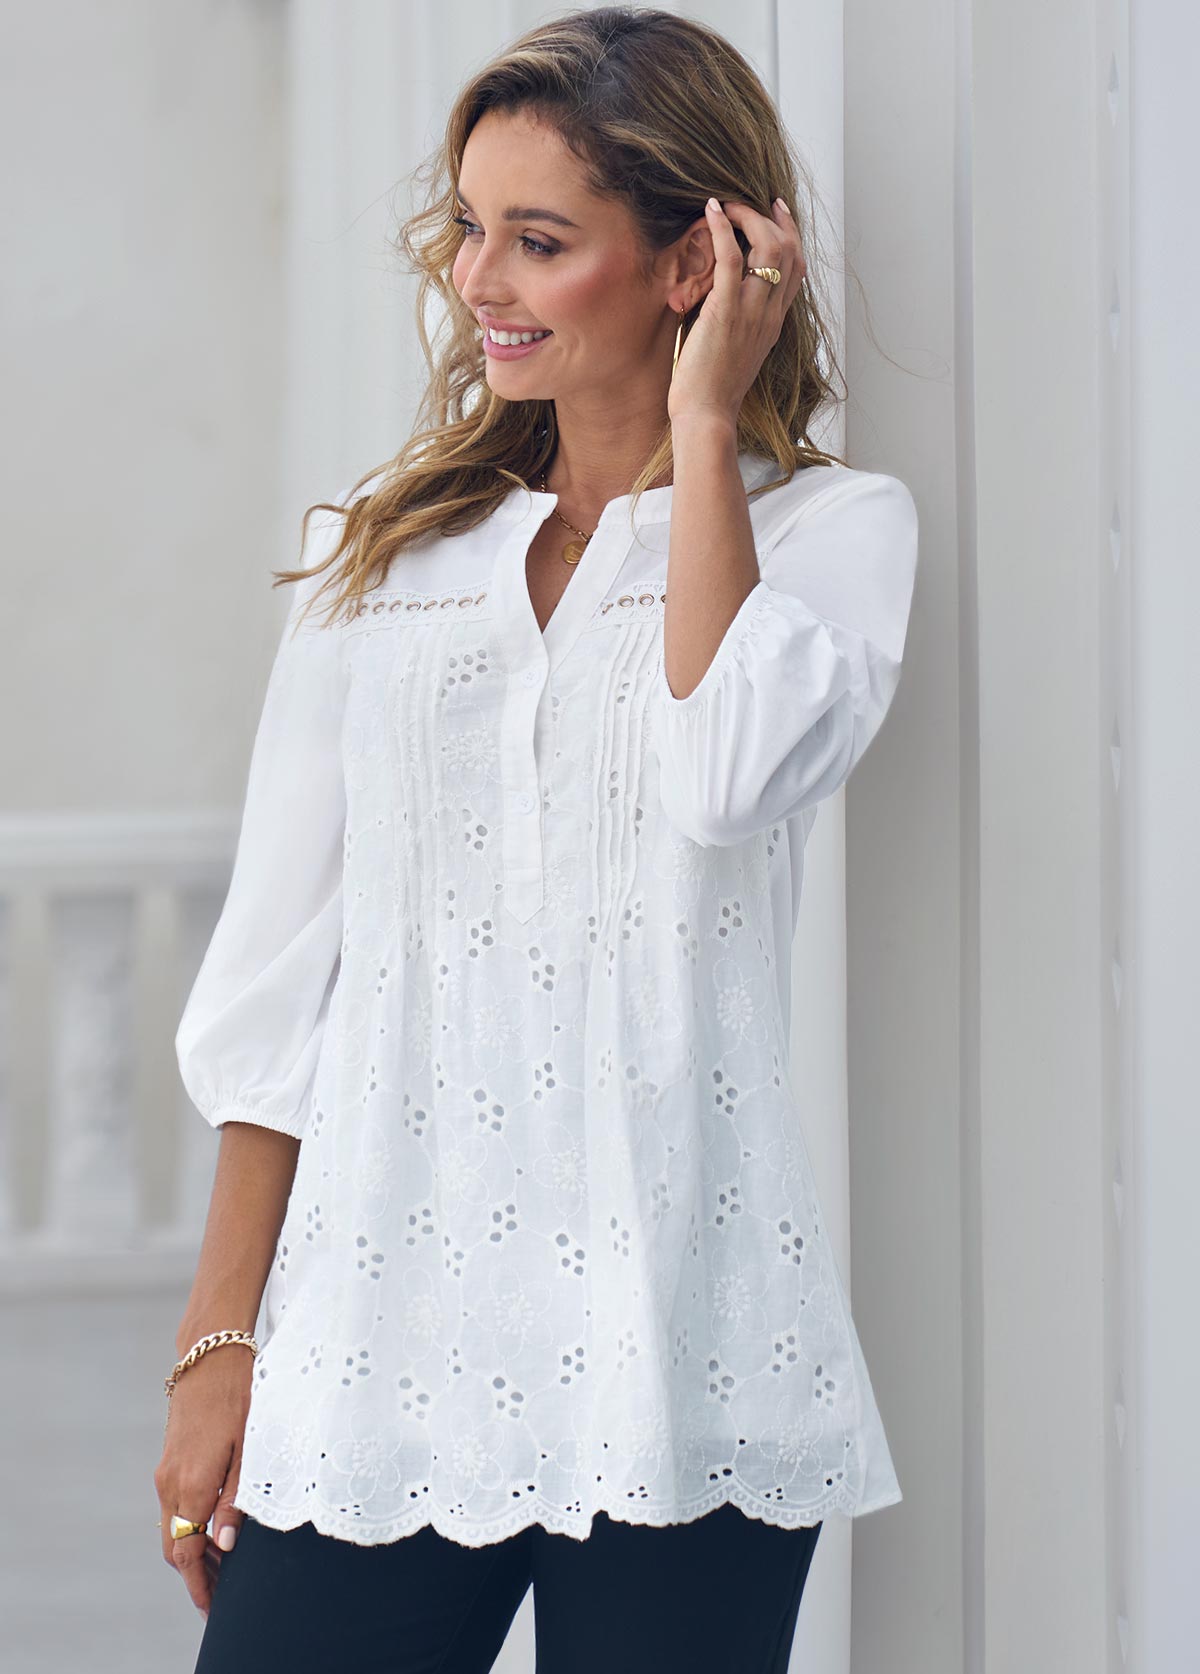 Embroidered Hollow Out Split Neck White Blouse | modlily.com - USD 15.98